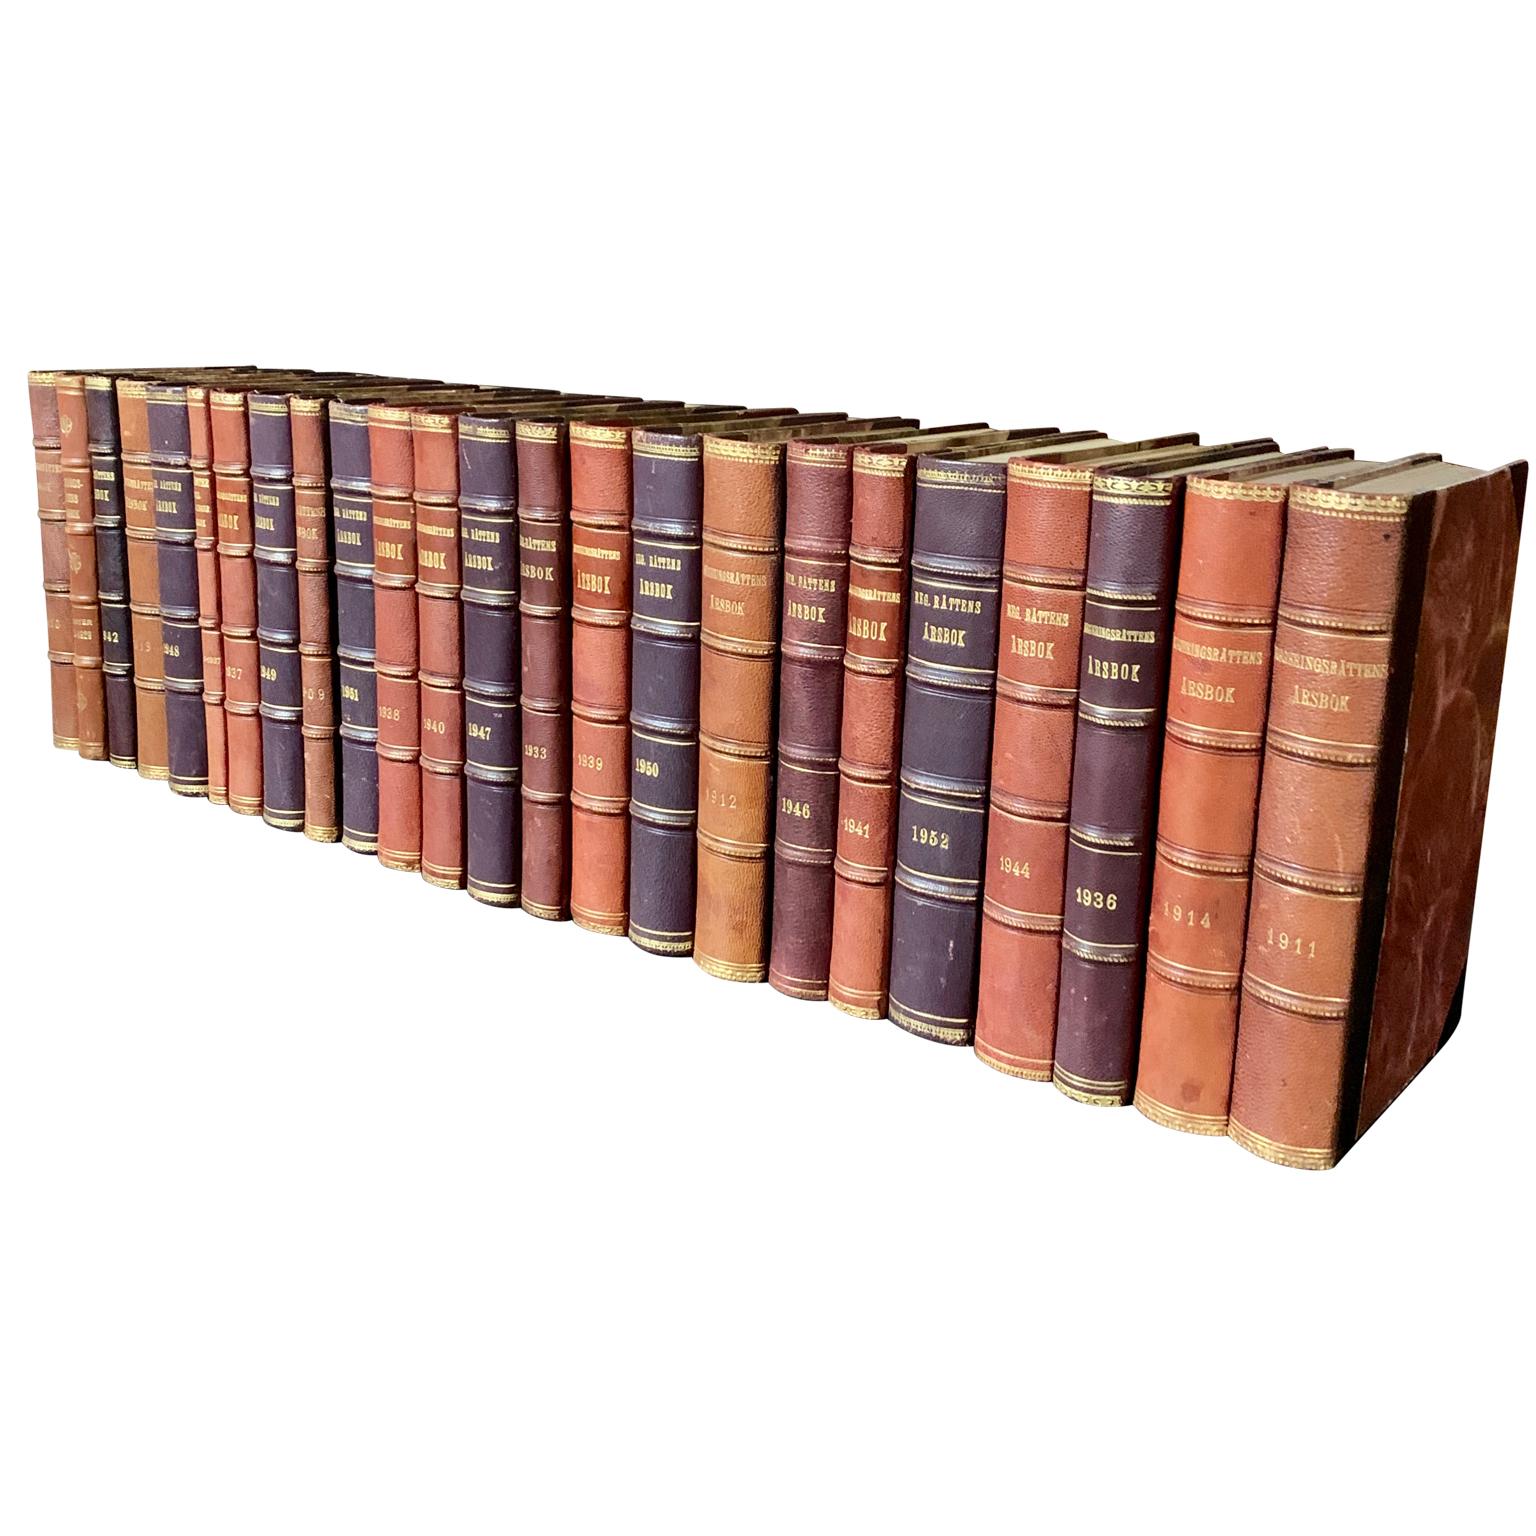 A collection of 24 Swedish decorative antique leather-bound library books.
The books are wrapped in leather-bound covers, comprised of a selection of warm tones and gold leaf print embossing.
The book collection measure horizontally is 79 cm,